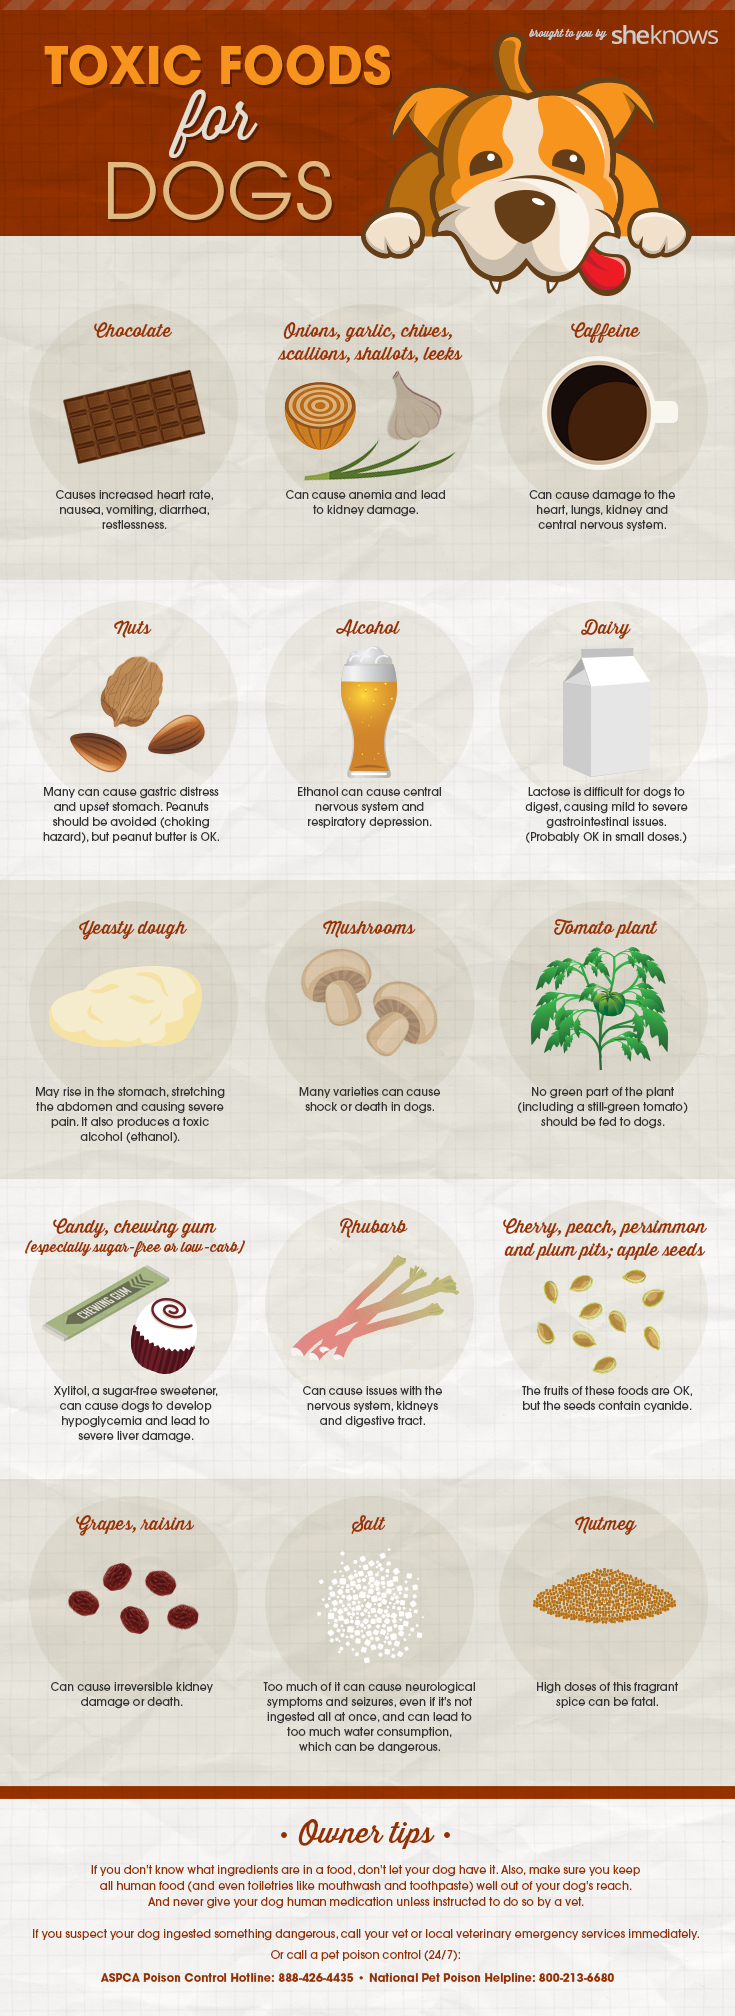 http://thecottagemarket.com/wp-content/uploads/2015/09/foods-toxic-to-dogs-infographic.jpg